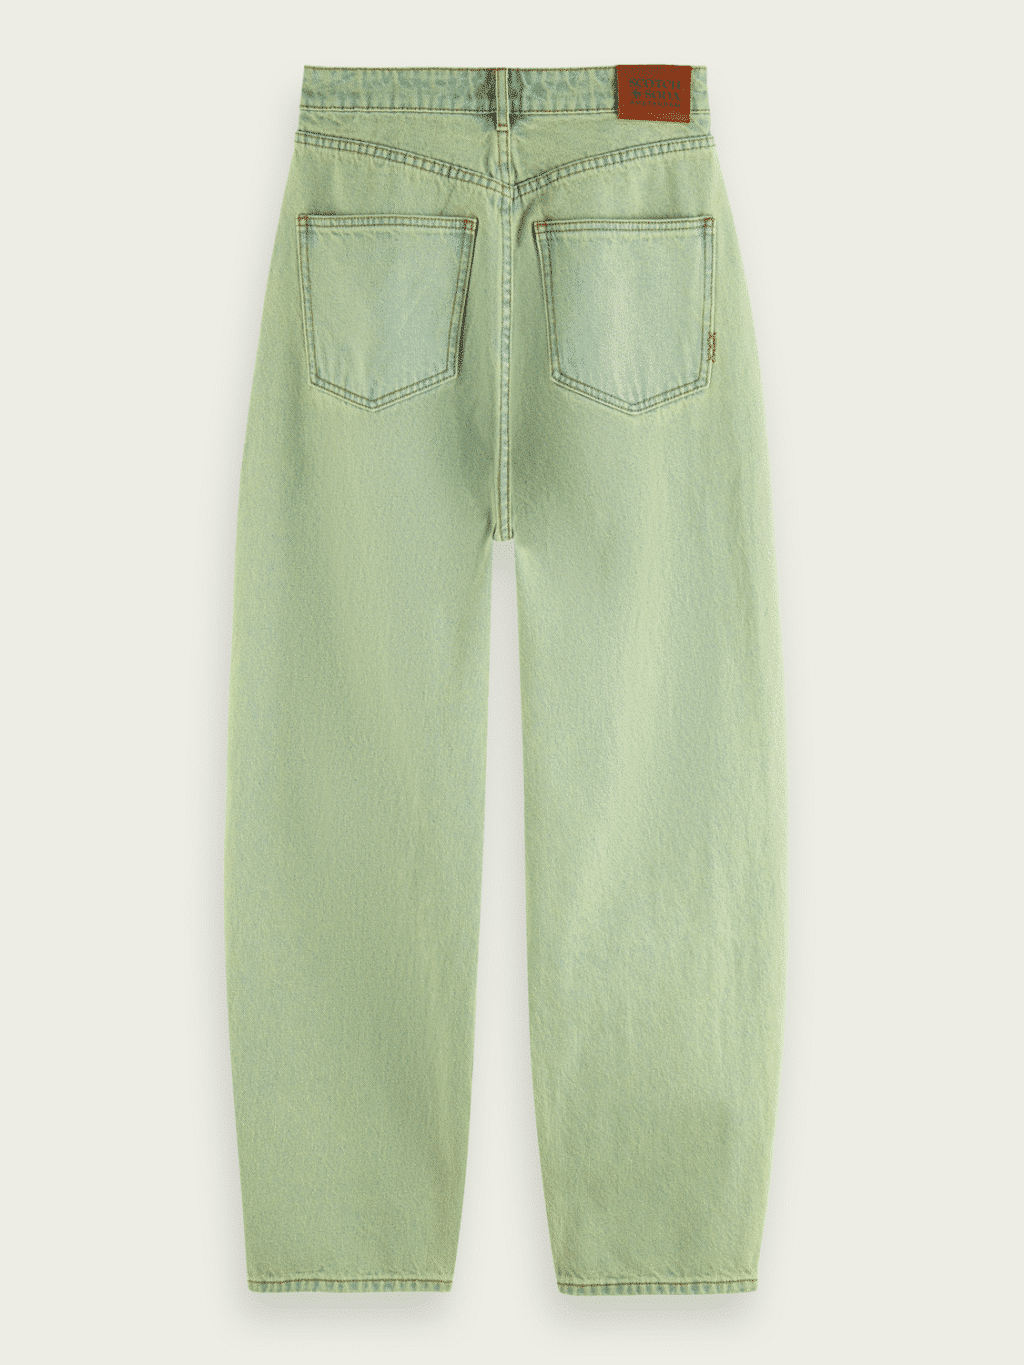 Spring summer 2022 SCOTCH & SODA THE TIDE BALLOON LEG FIT JEANS